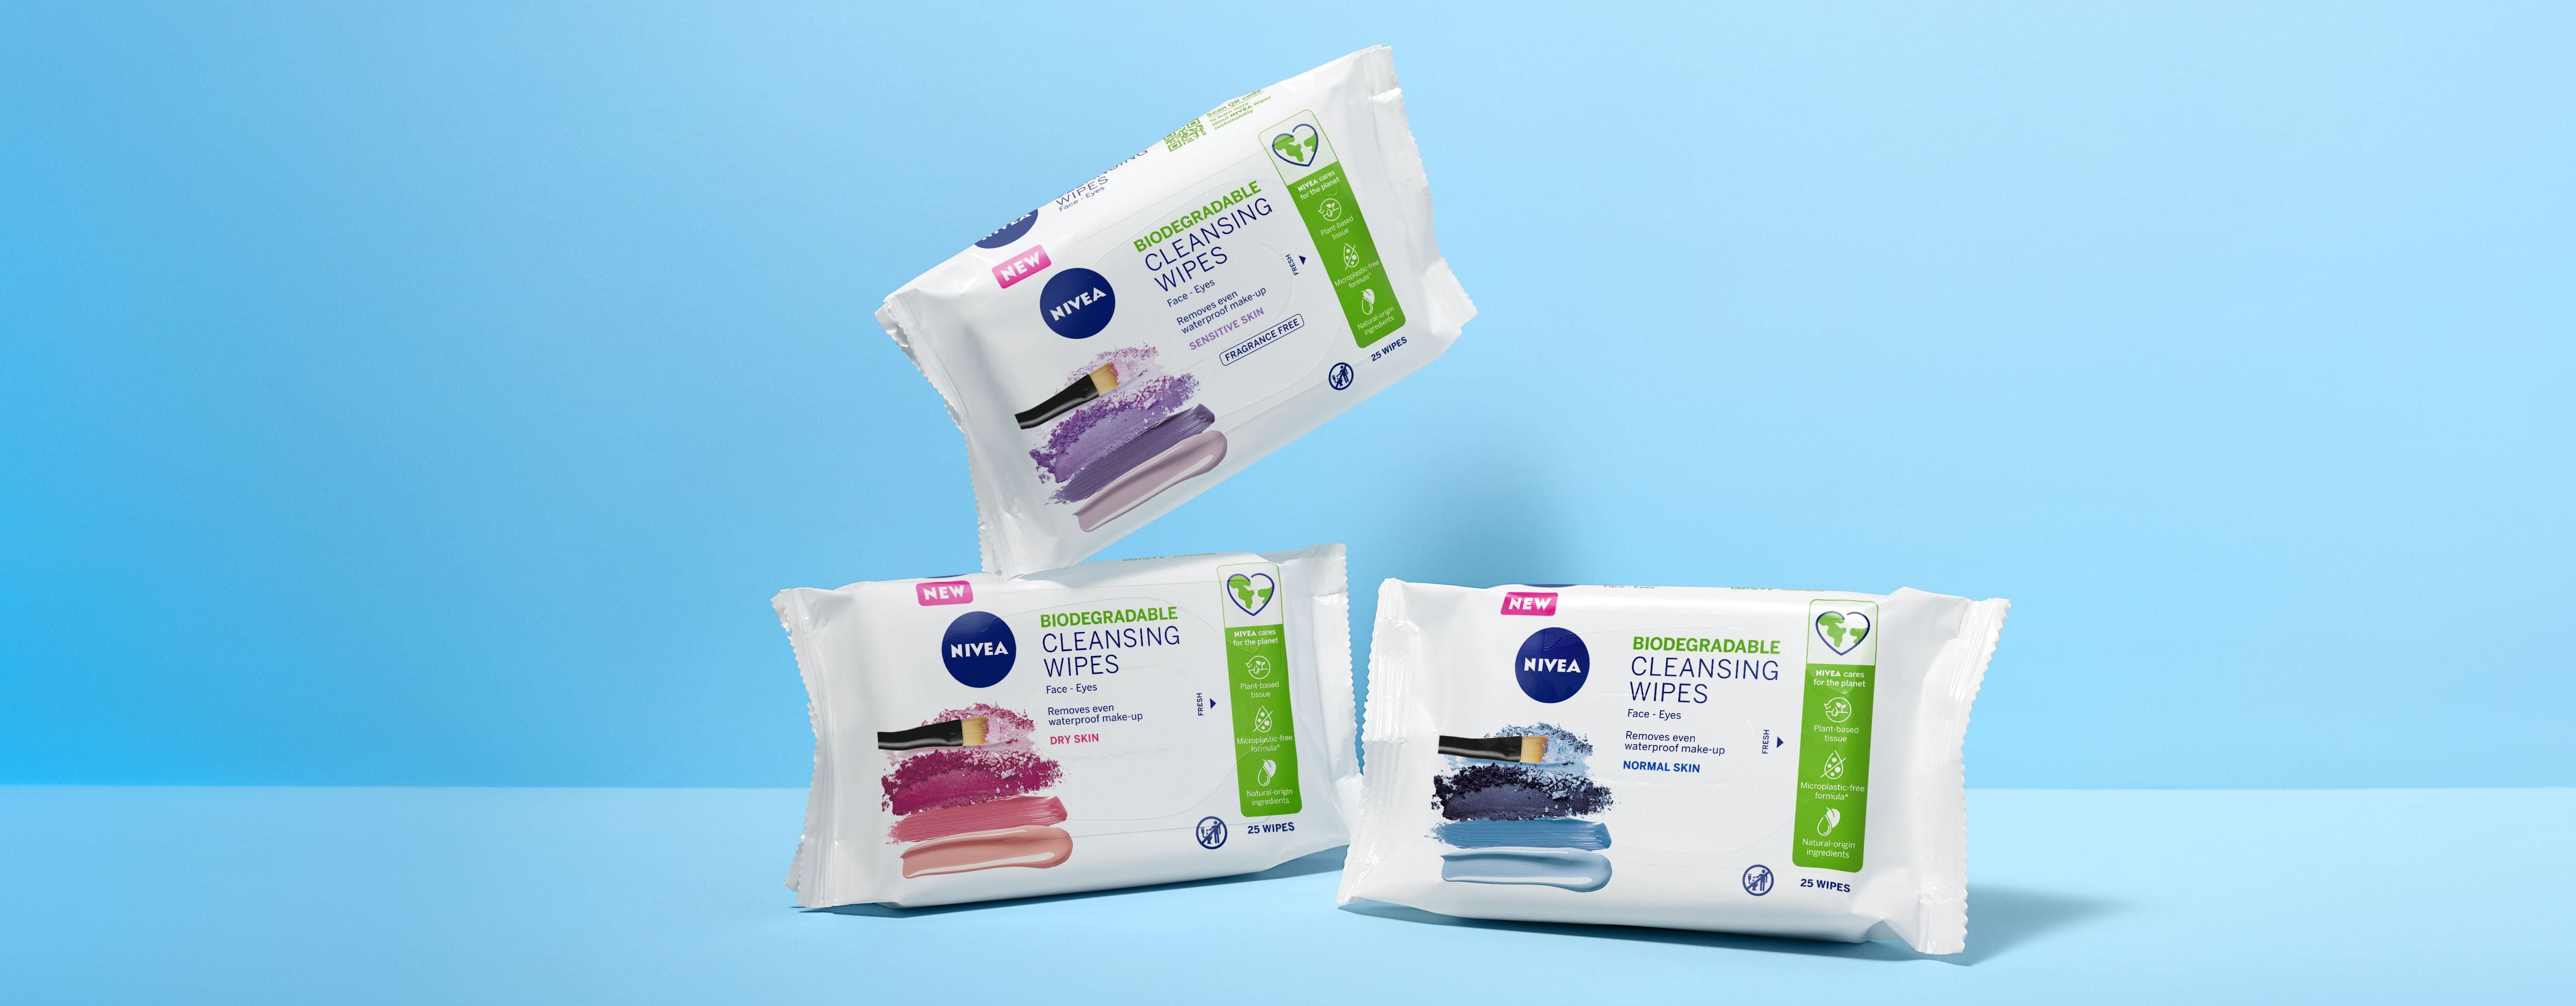 WHICH FACE WIPES ARE BIODEGRADABLE? 